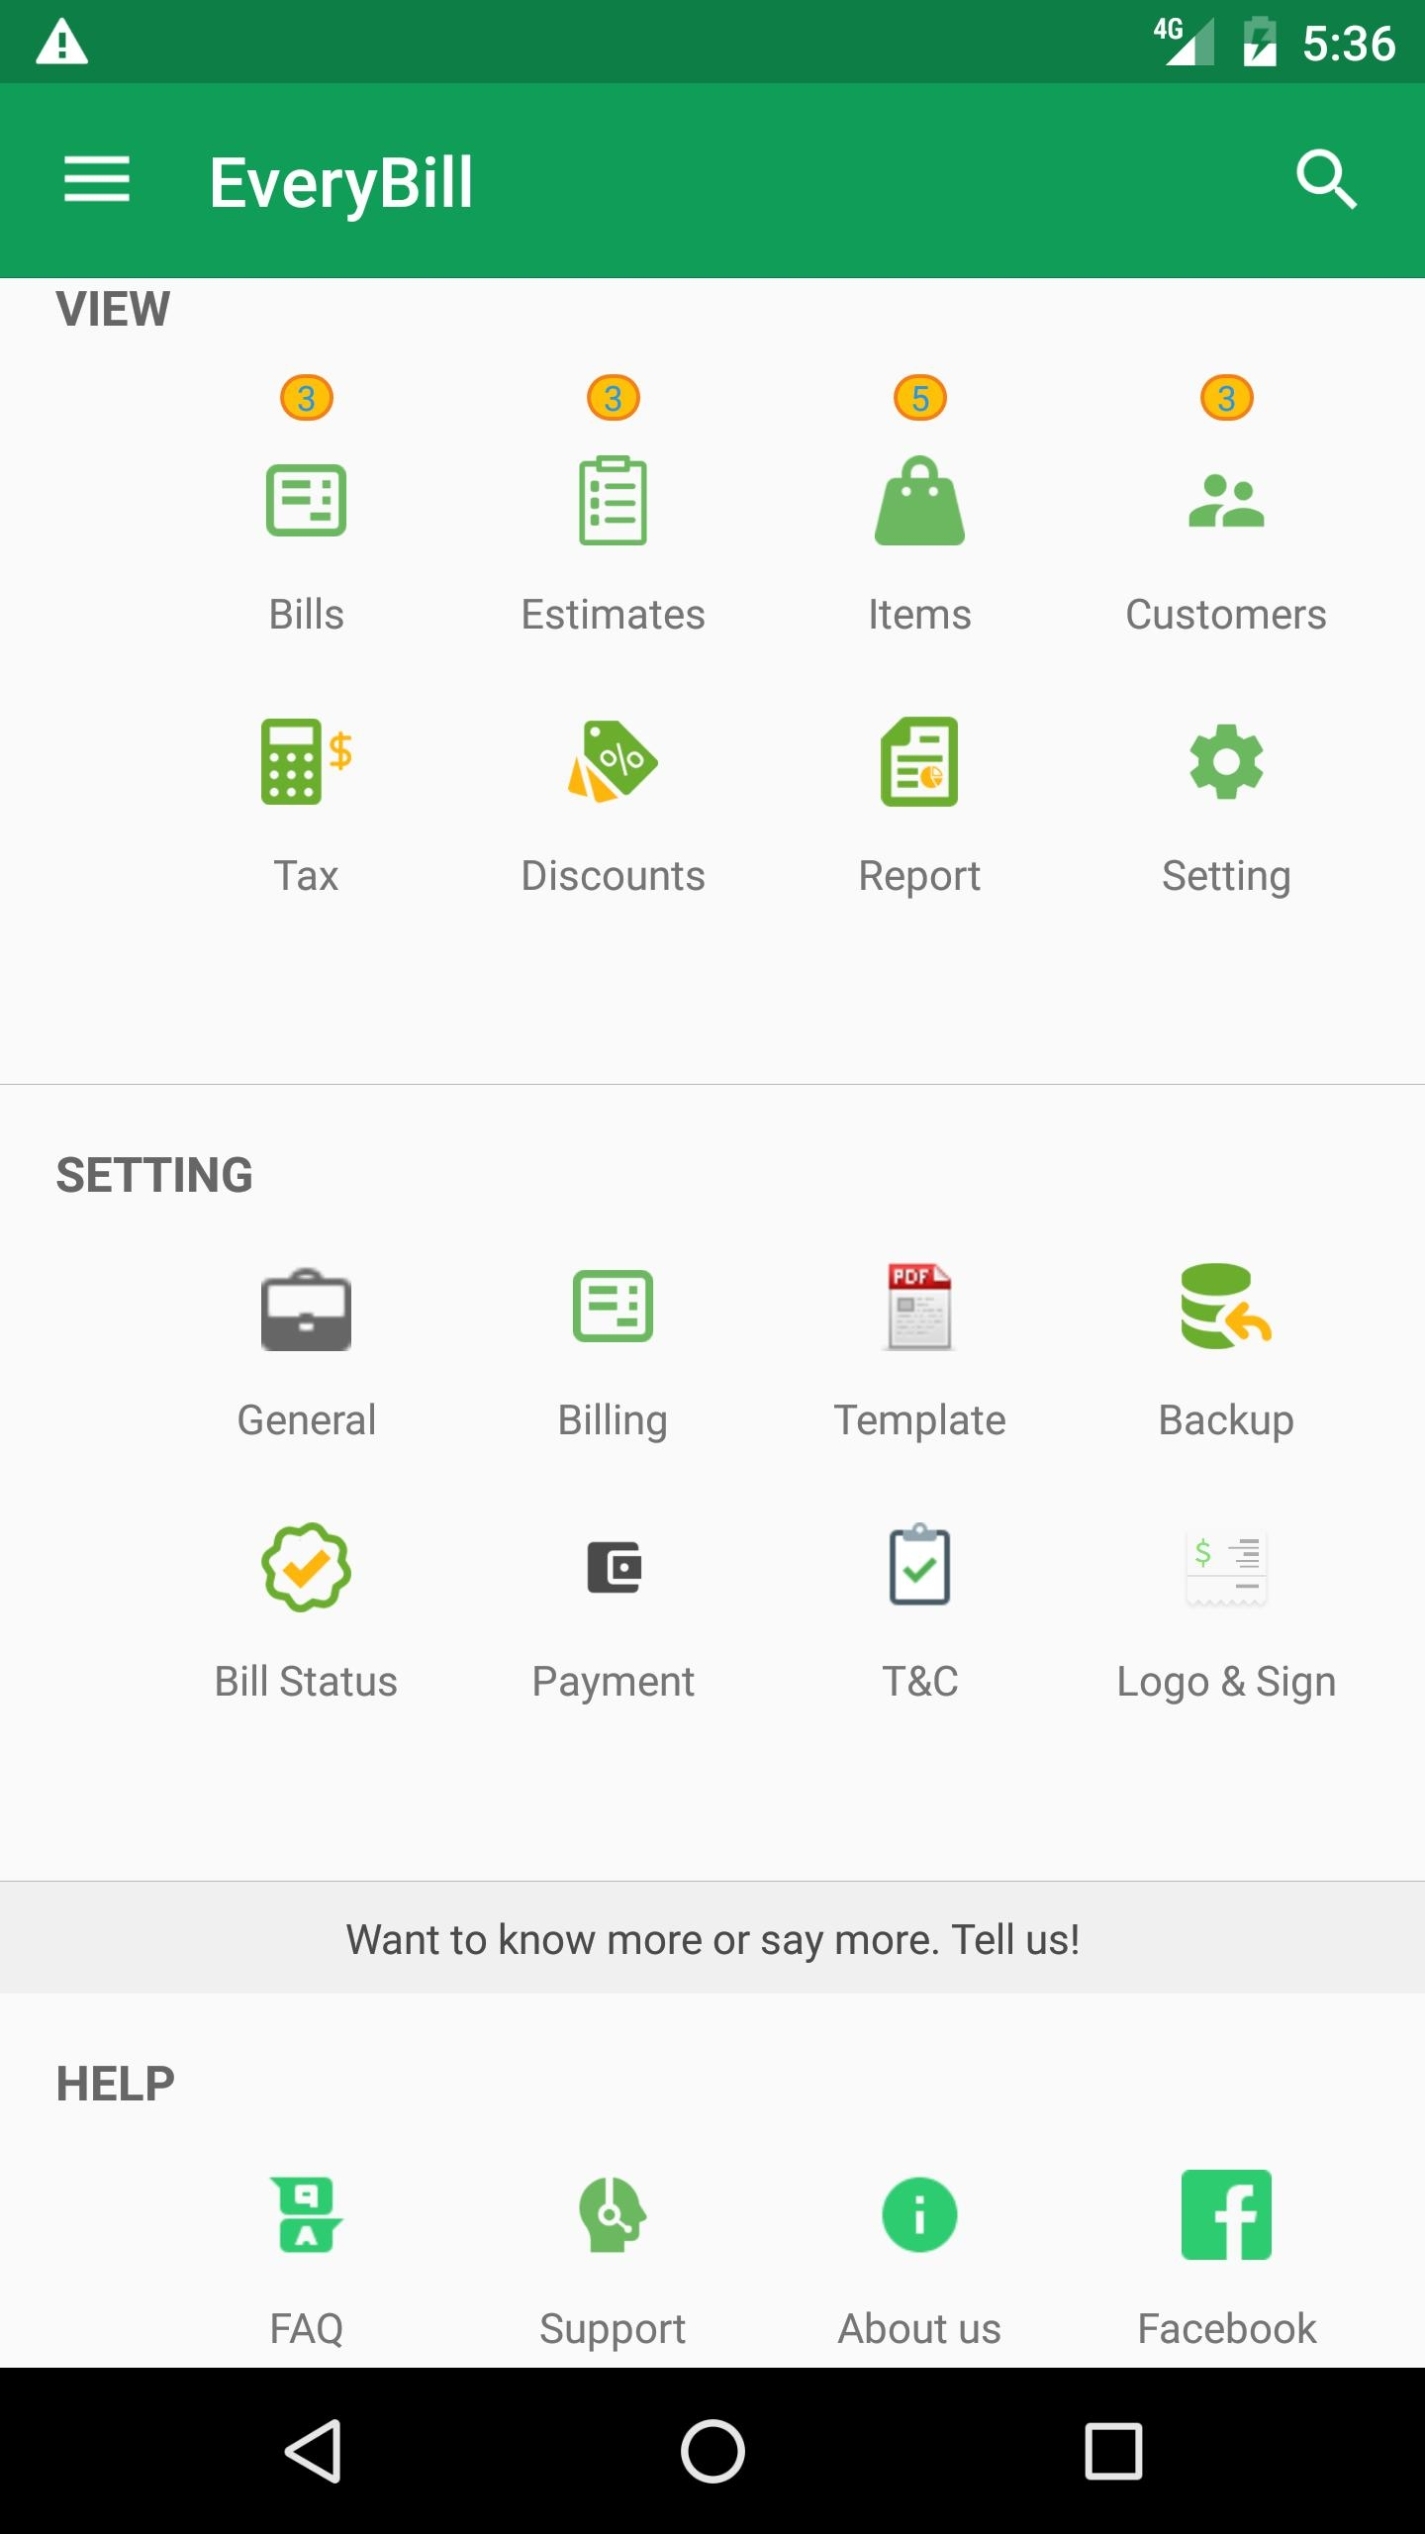 Free Gst Invoice! Estimate, Account, Inventory App For Android - Apk In Free Invoice Template For Android